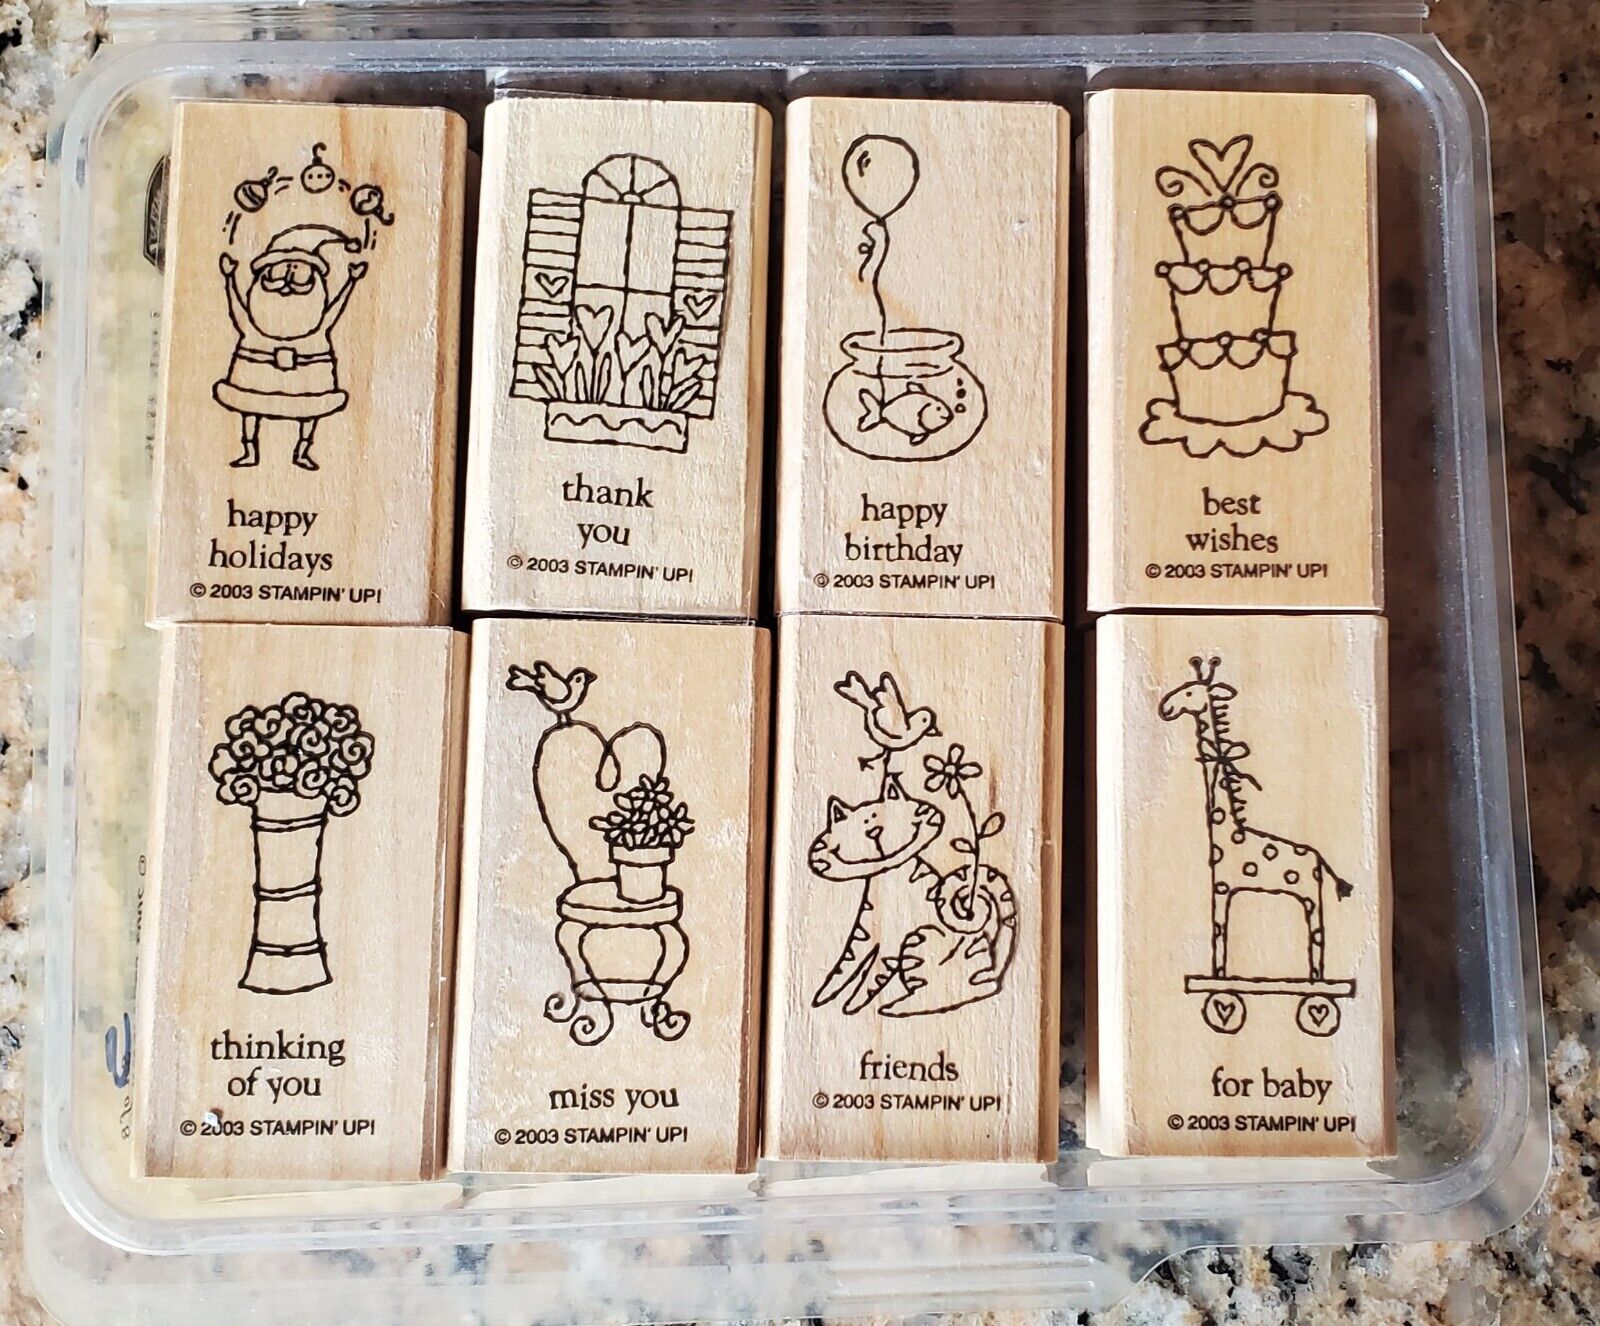 Stampin' Up! Wood Stamp Set - Little Hello's Stamp Set $5 +shipping